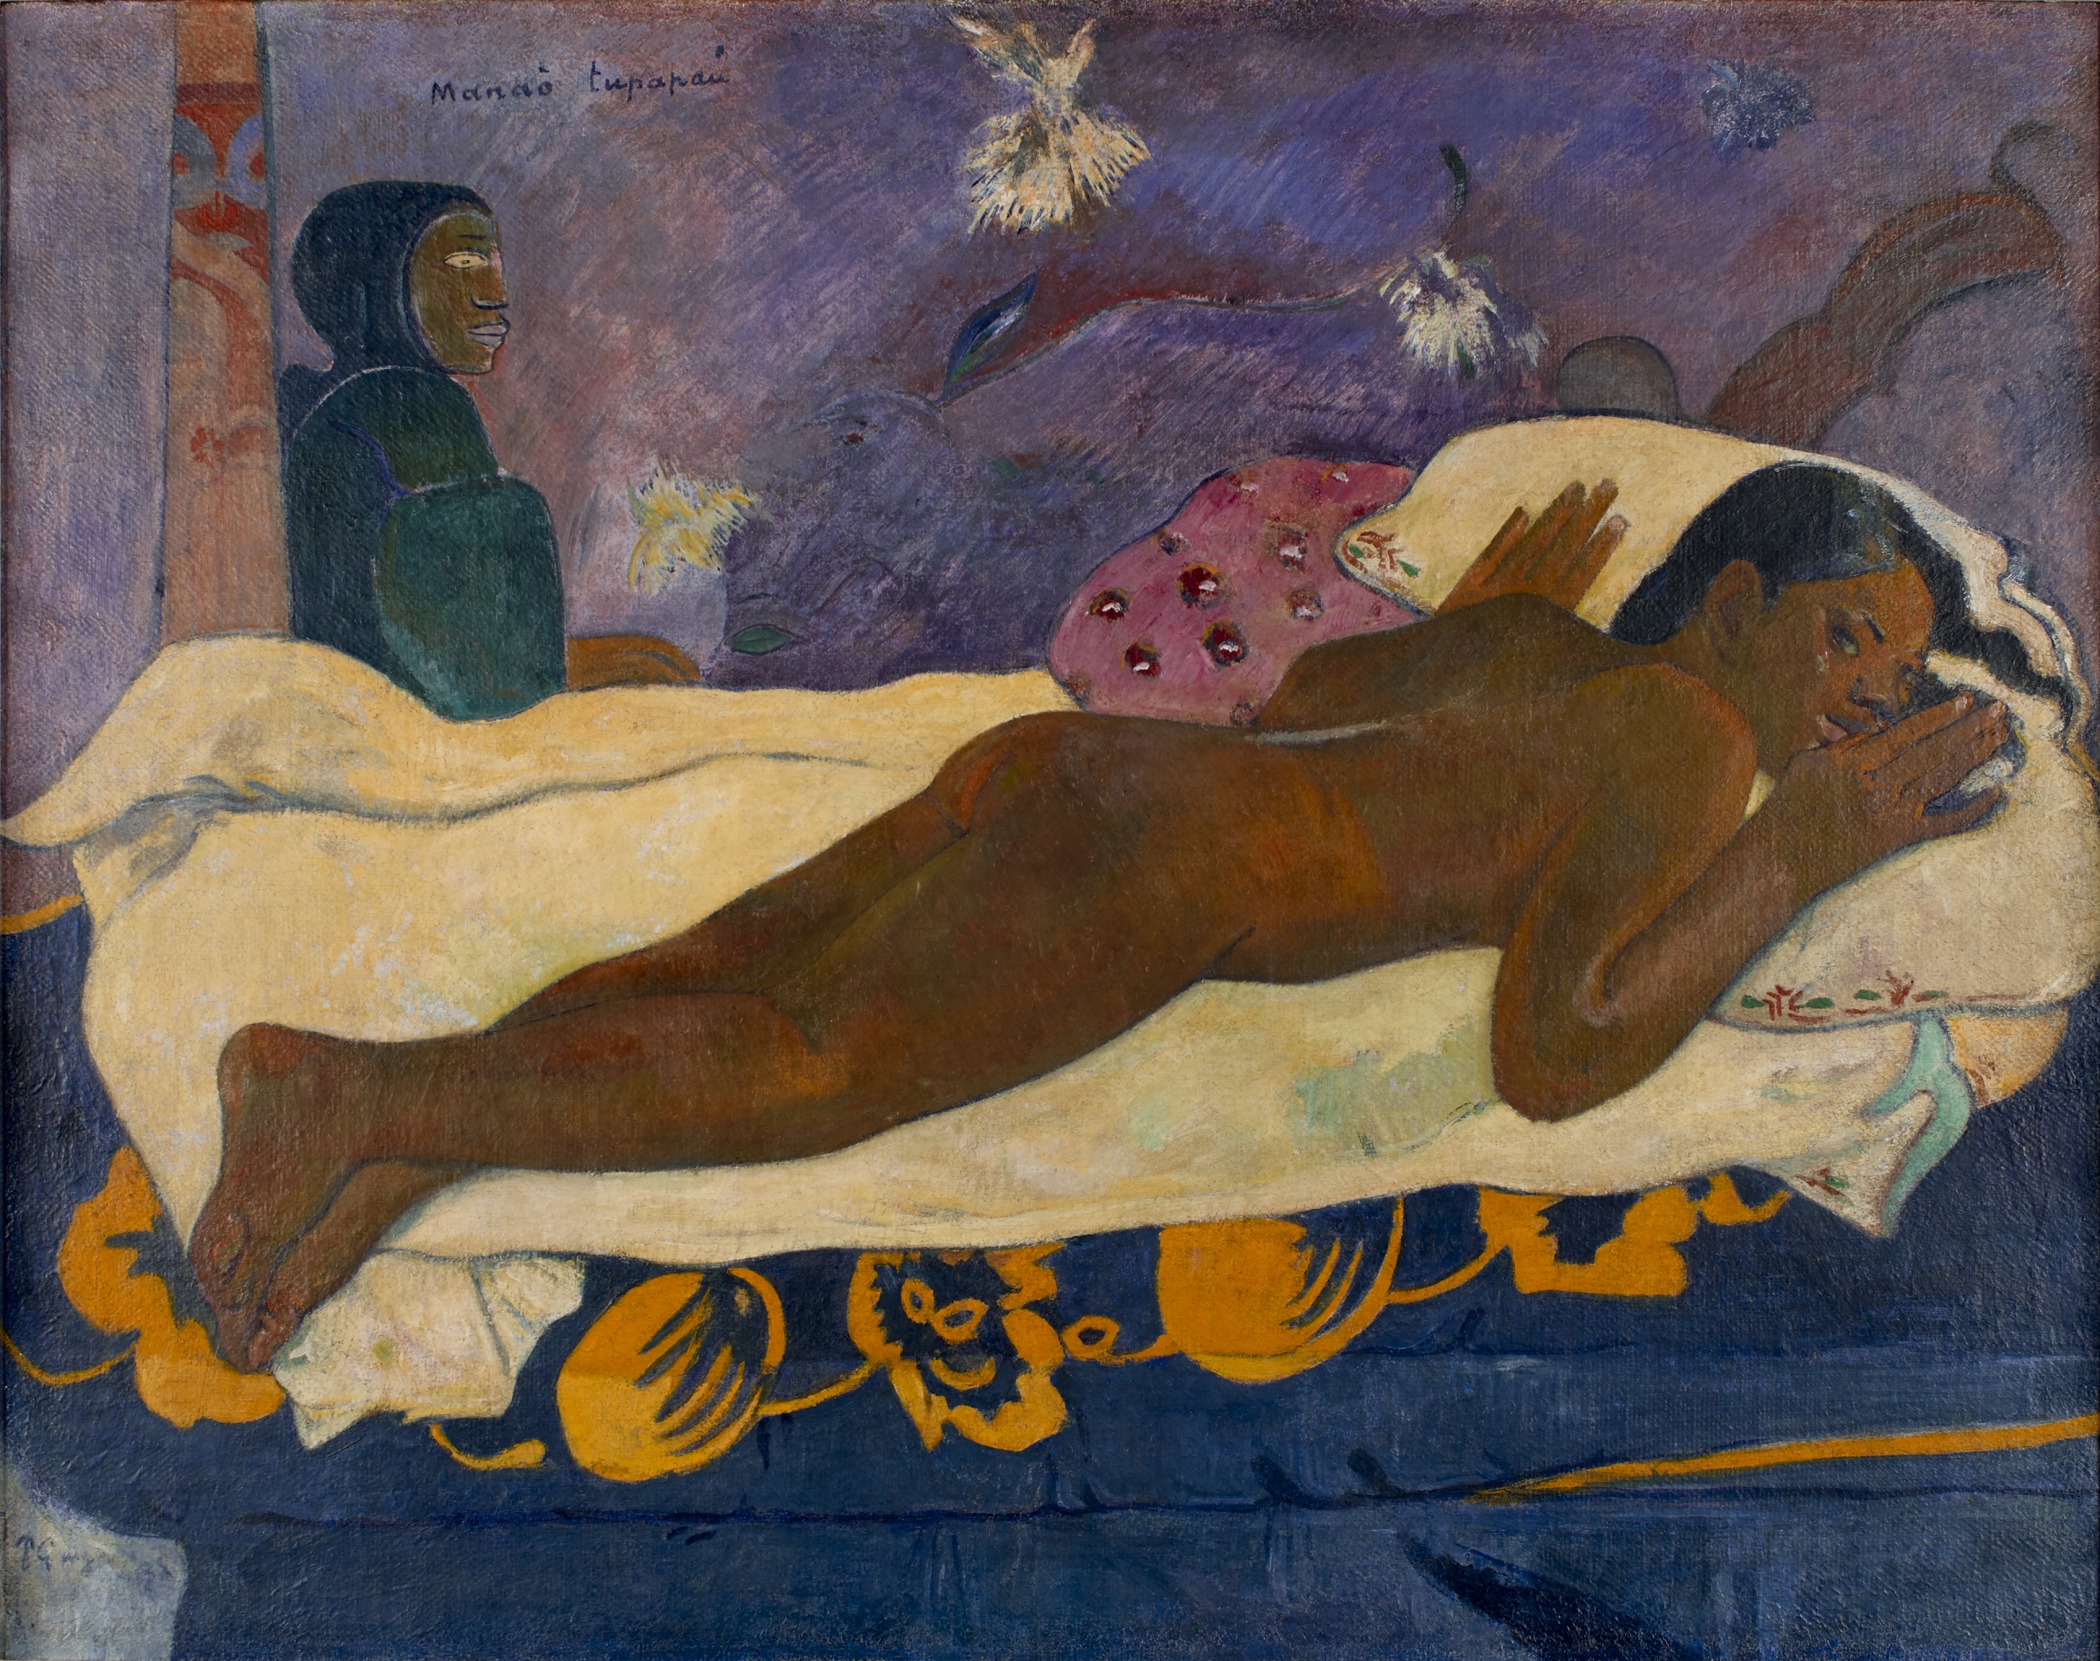 Paul Gauguin, Spirit of the Dead Watching, 1892, oil on burlap mounted on canvas, 116.05 x 134.62 x 13.34 cm (Albright-Knox Art Gallery, Buffalo, NY)